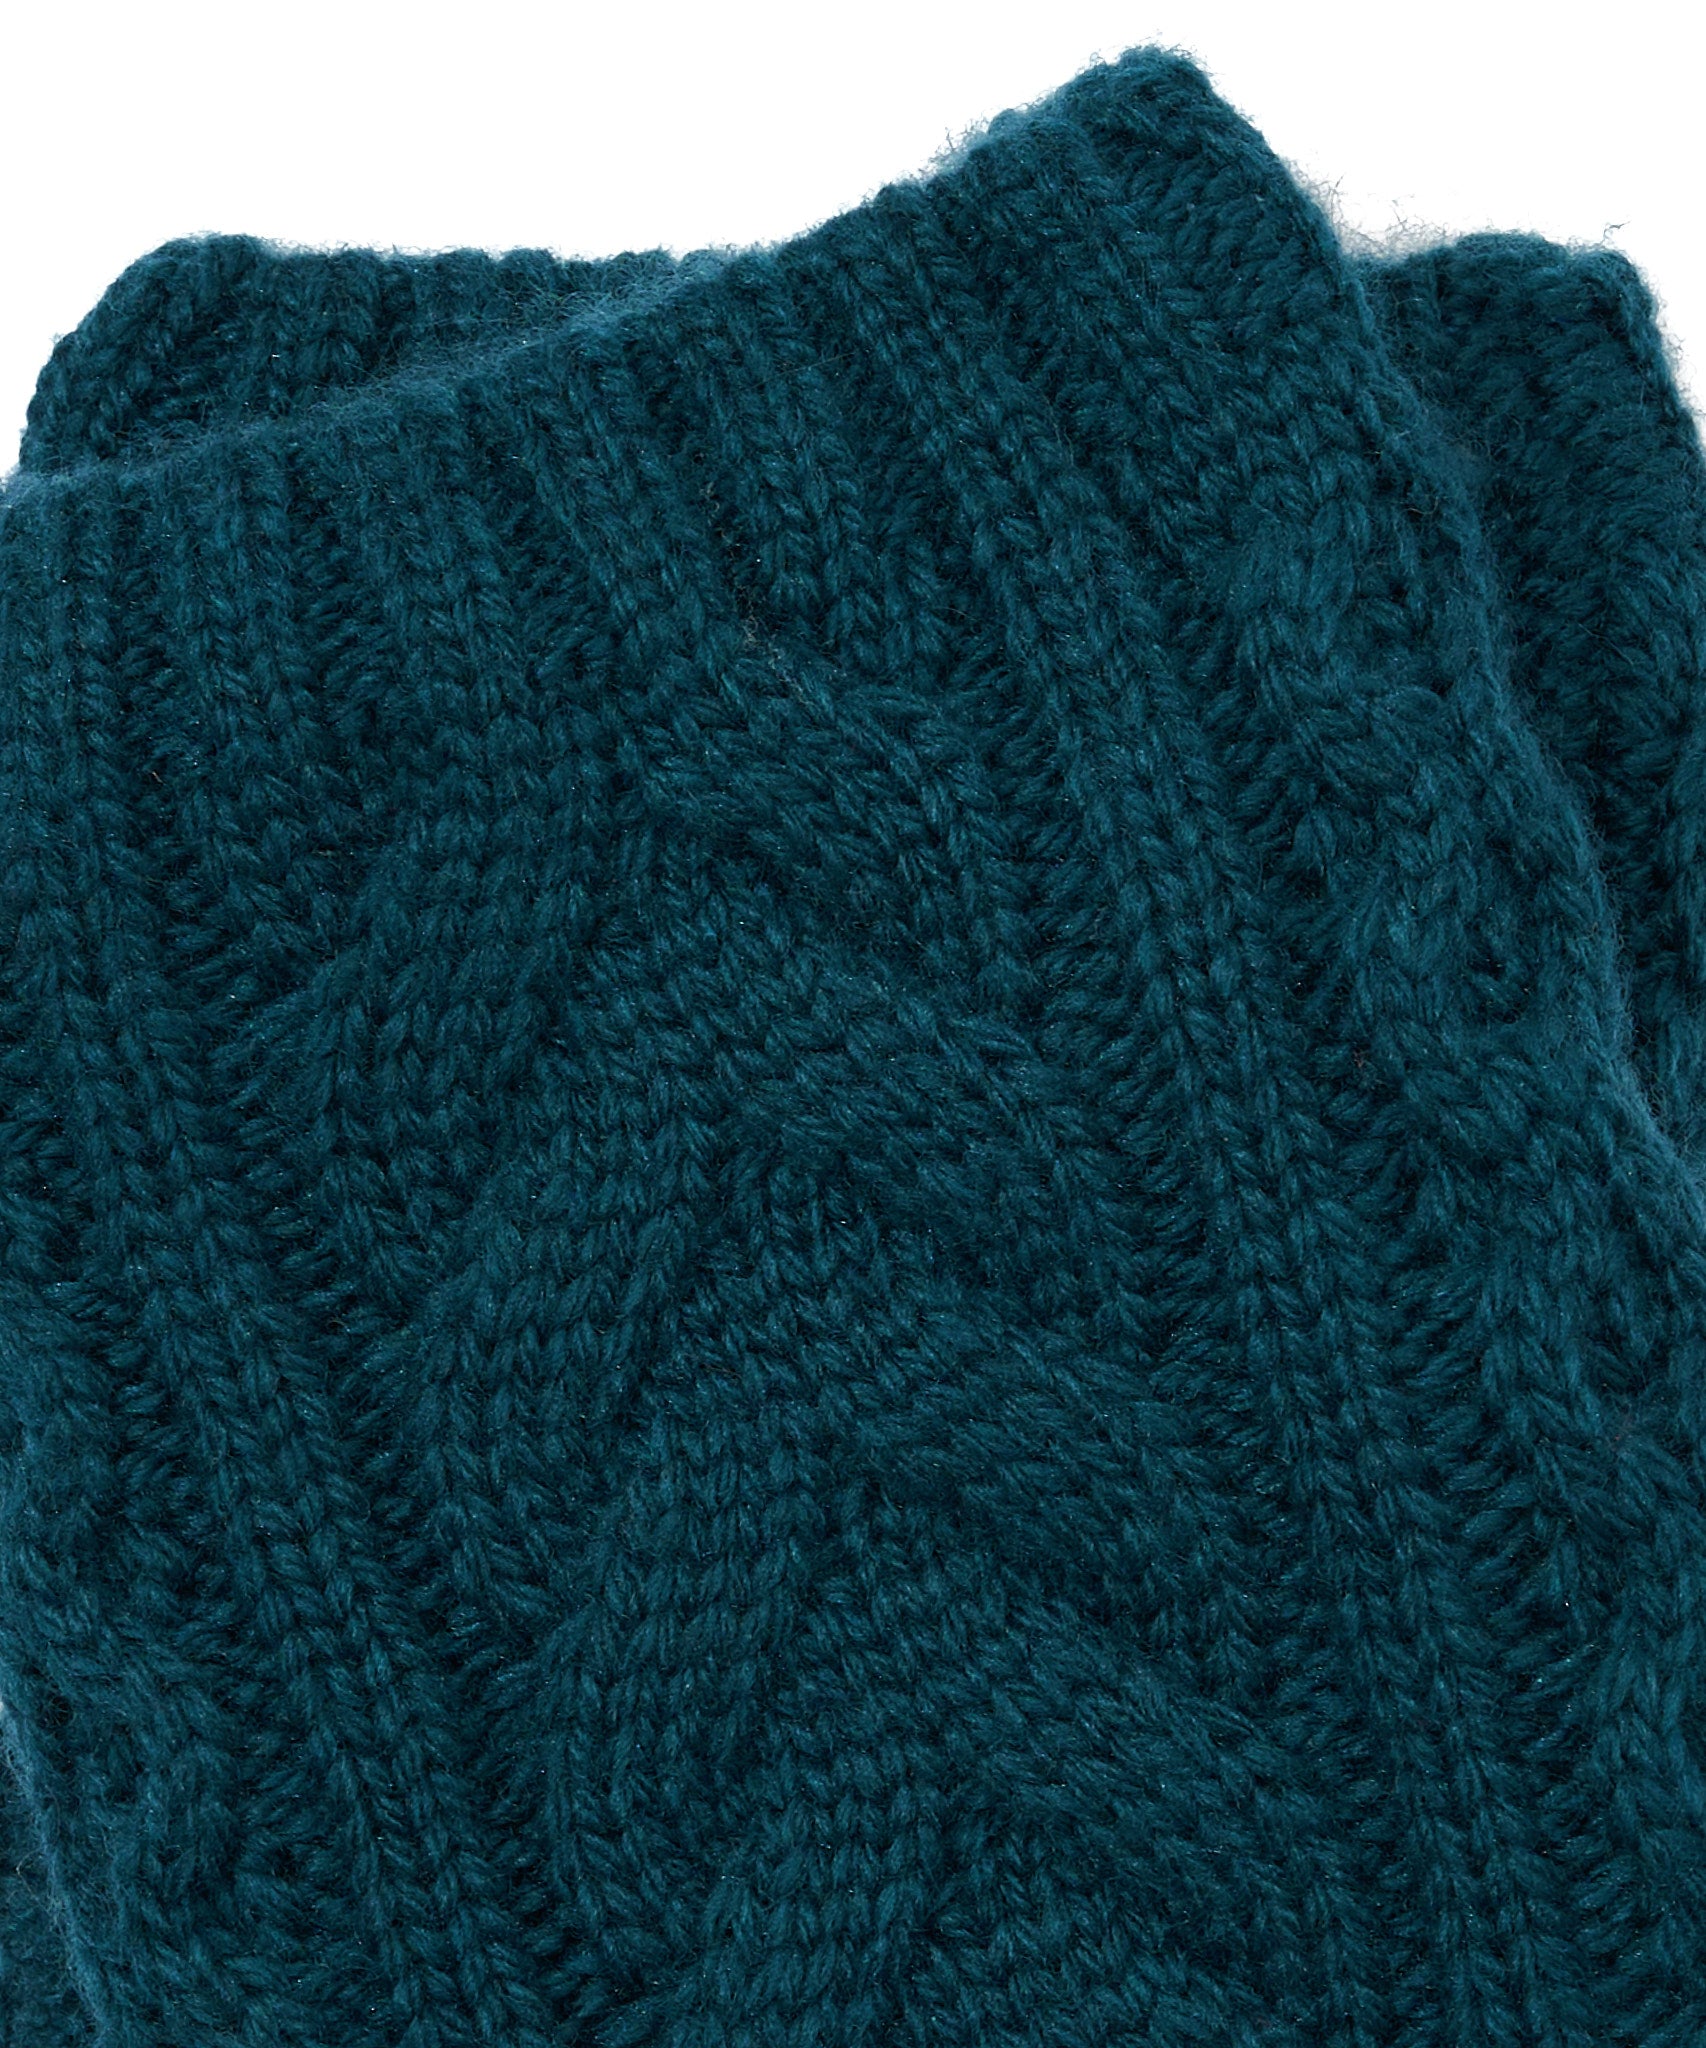 Recycled Wishbone Cable Handwarmer in color Deep Teal